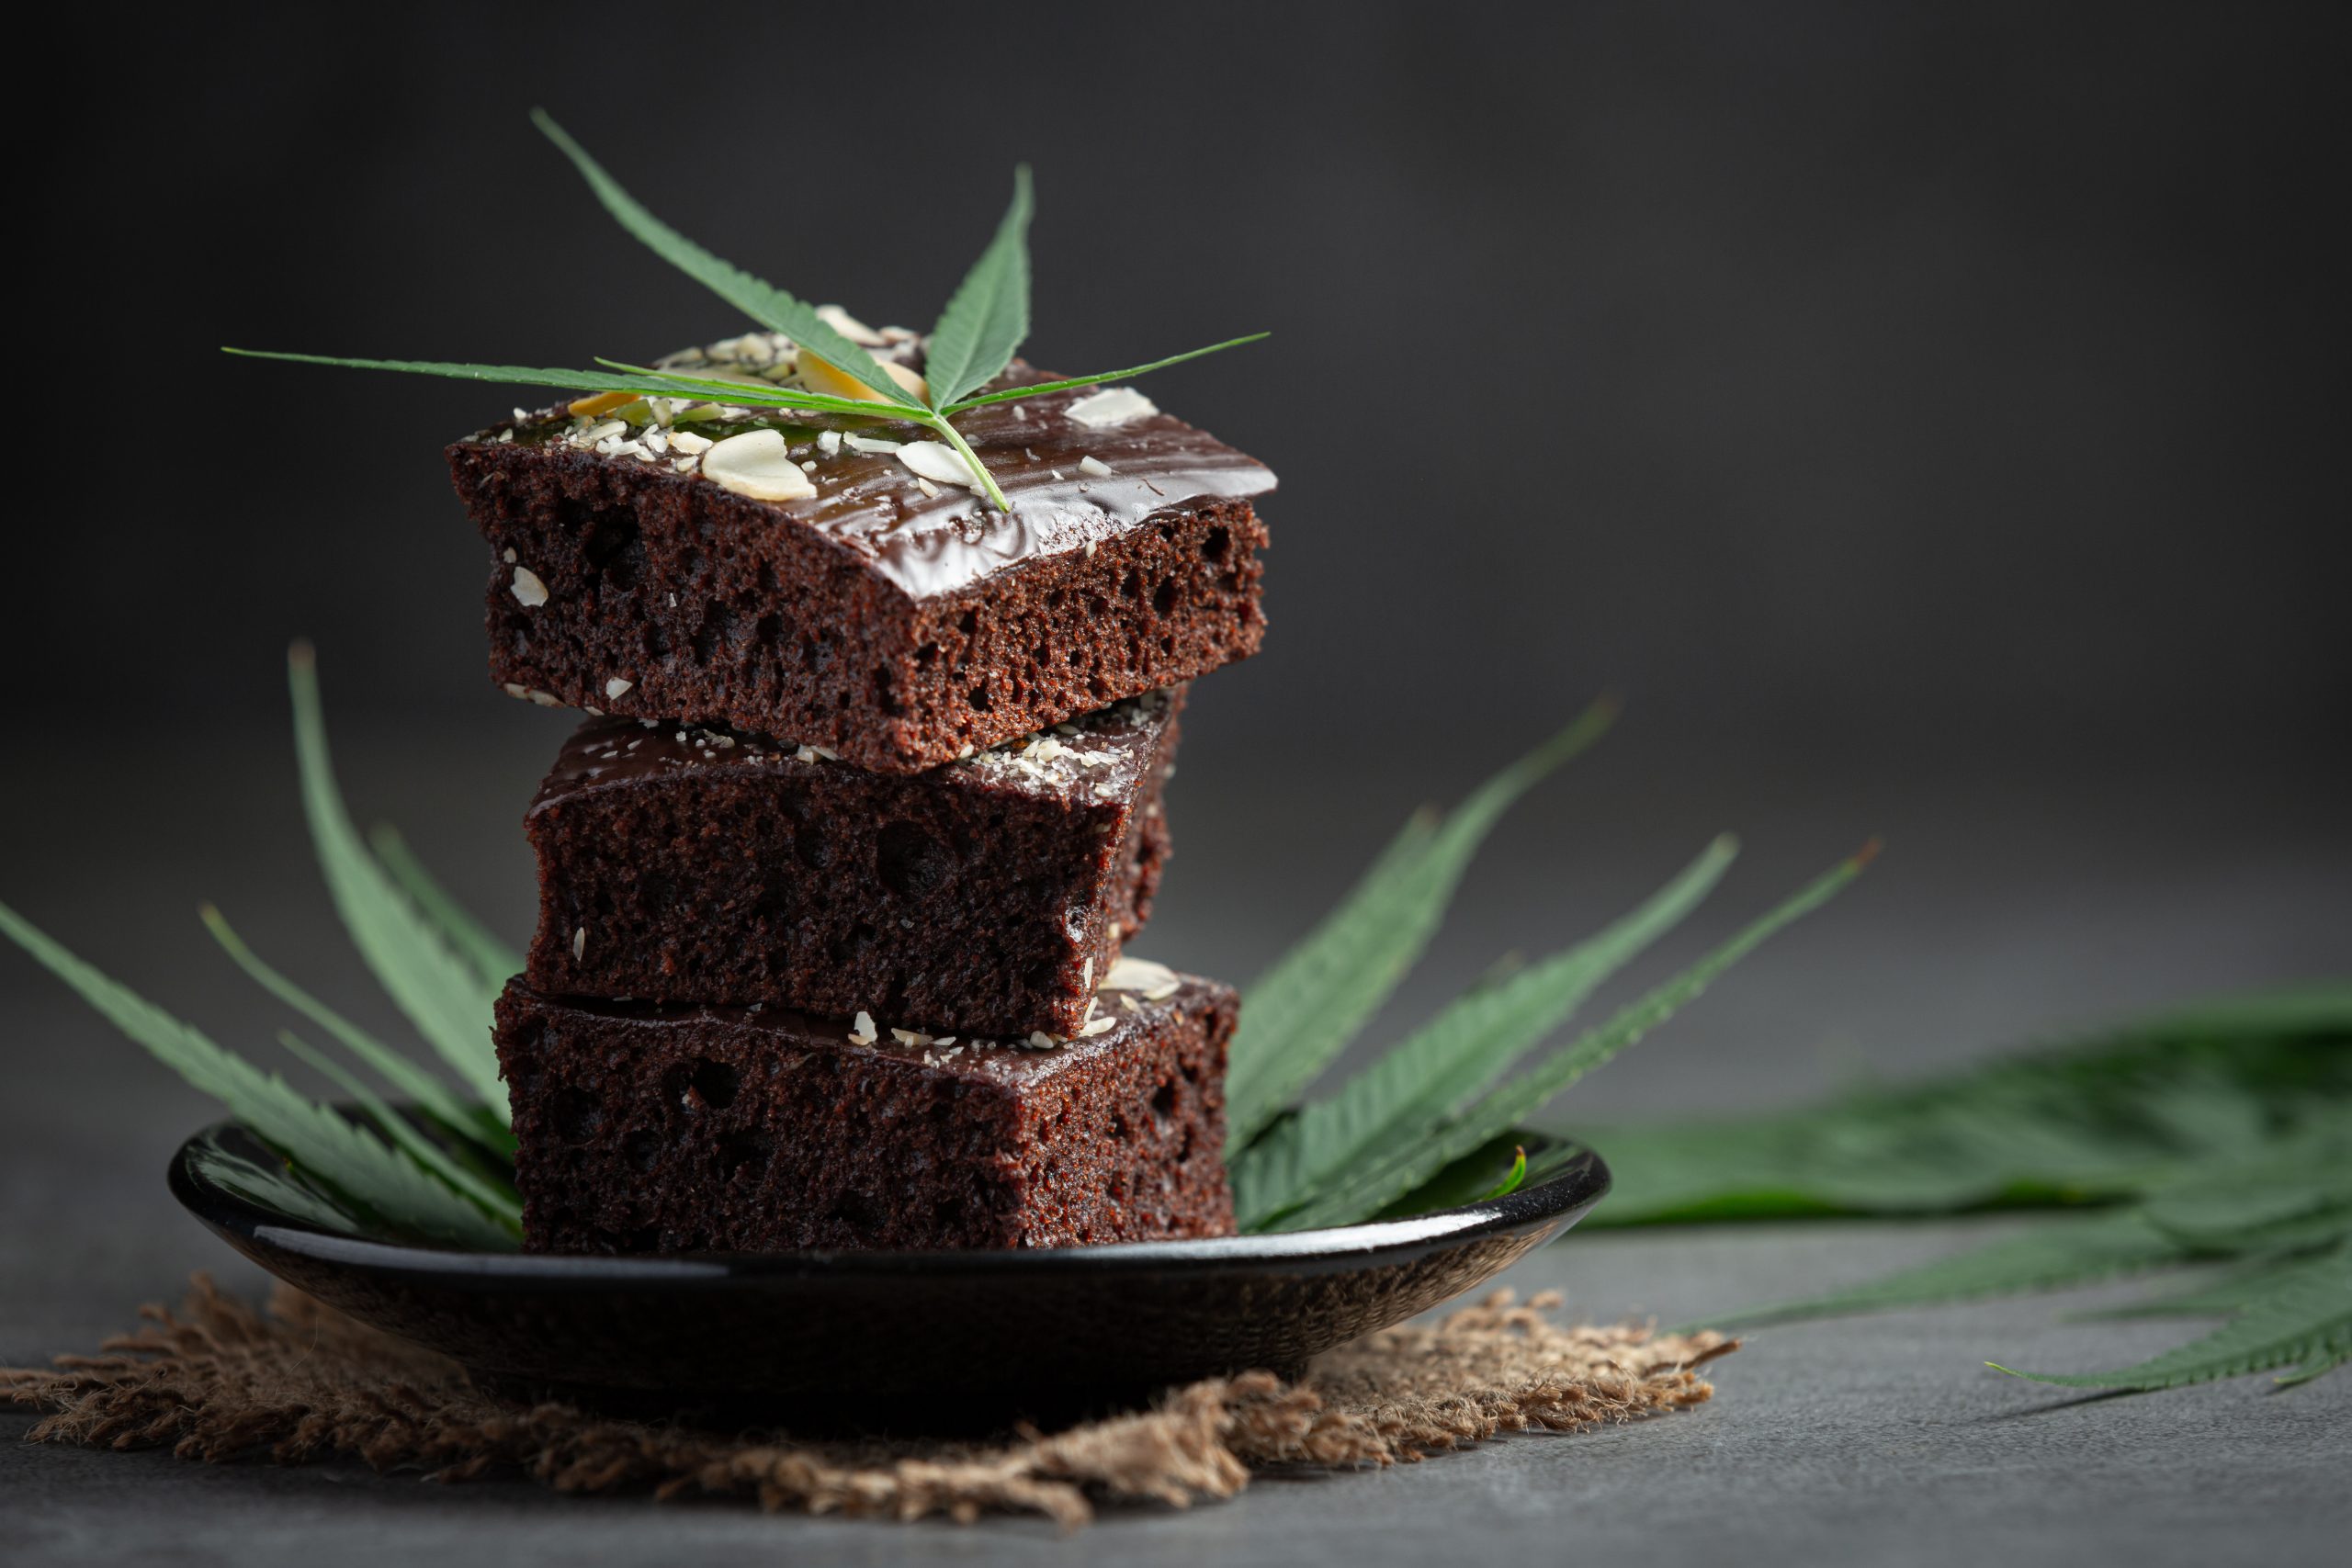 cannabis brownies and cannabis leaves put on black plate